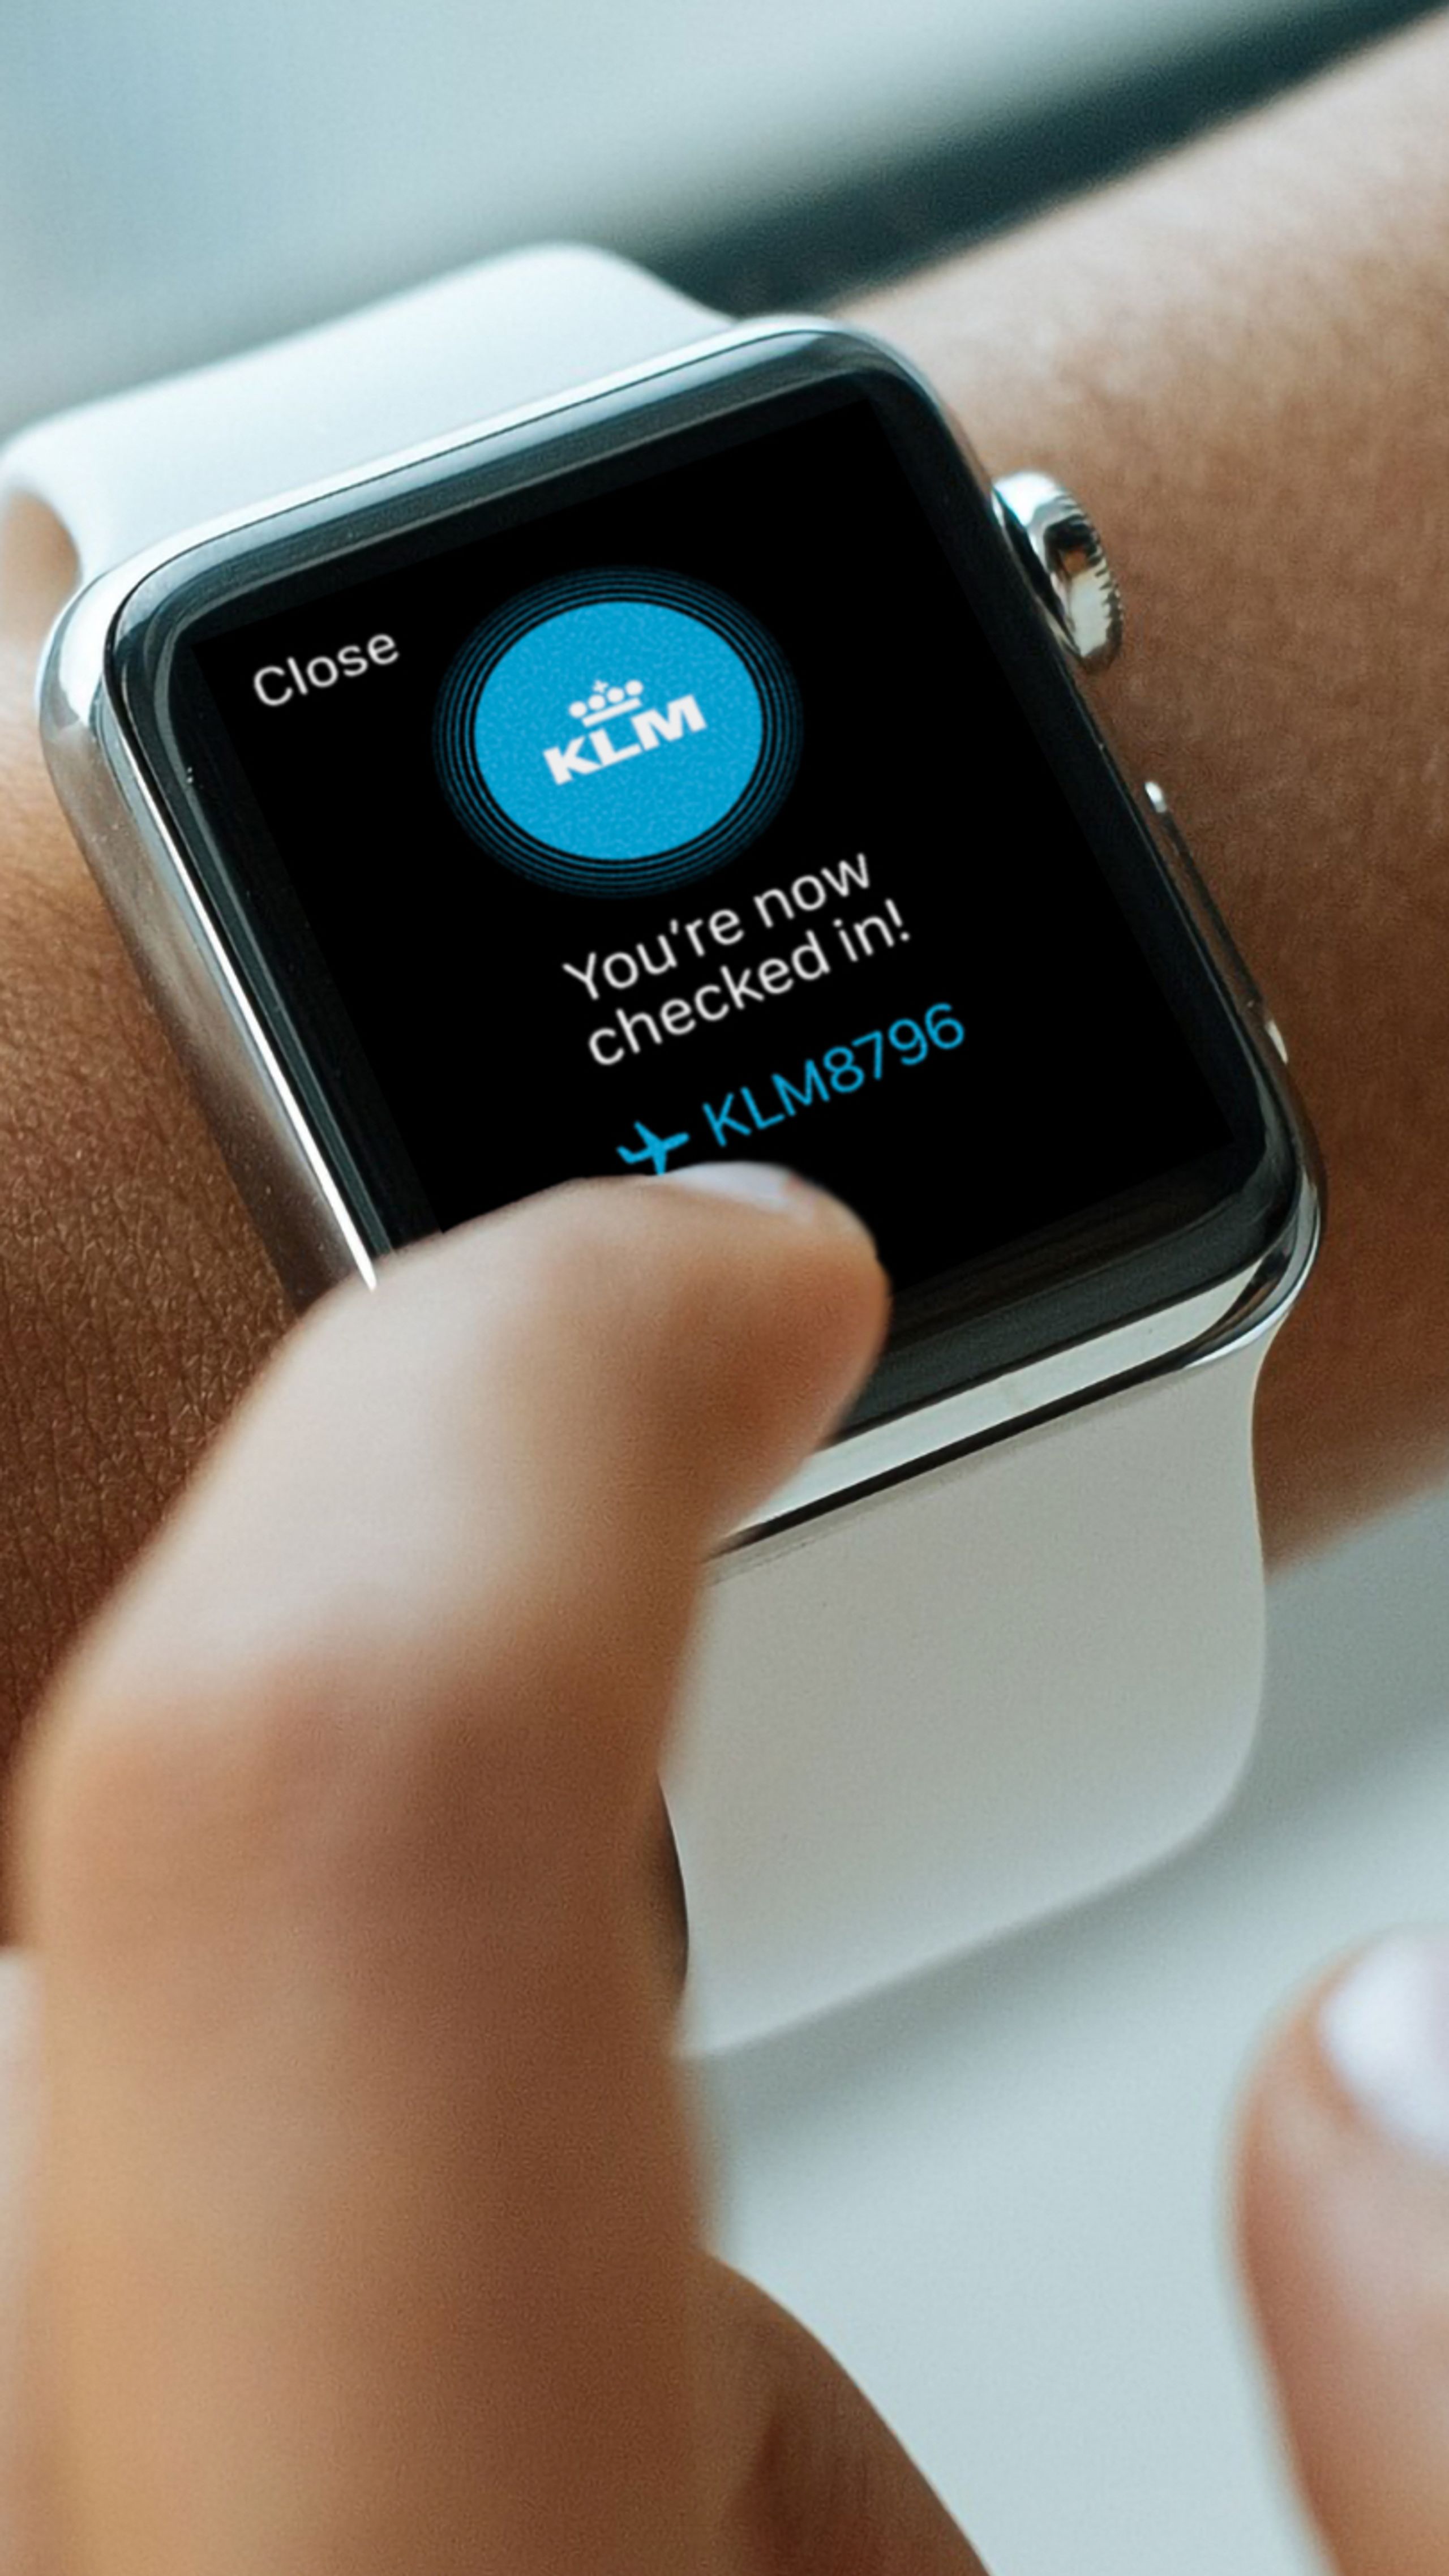 Check-in on a smartwatch